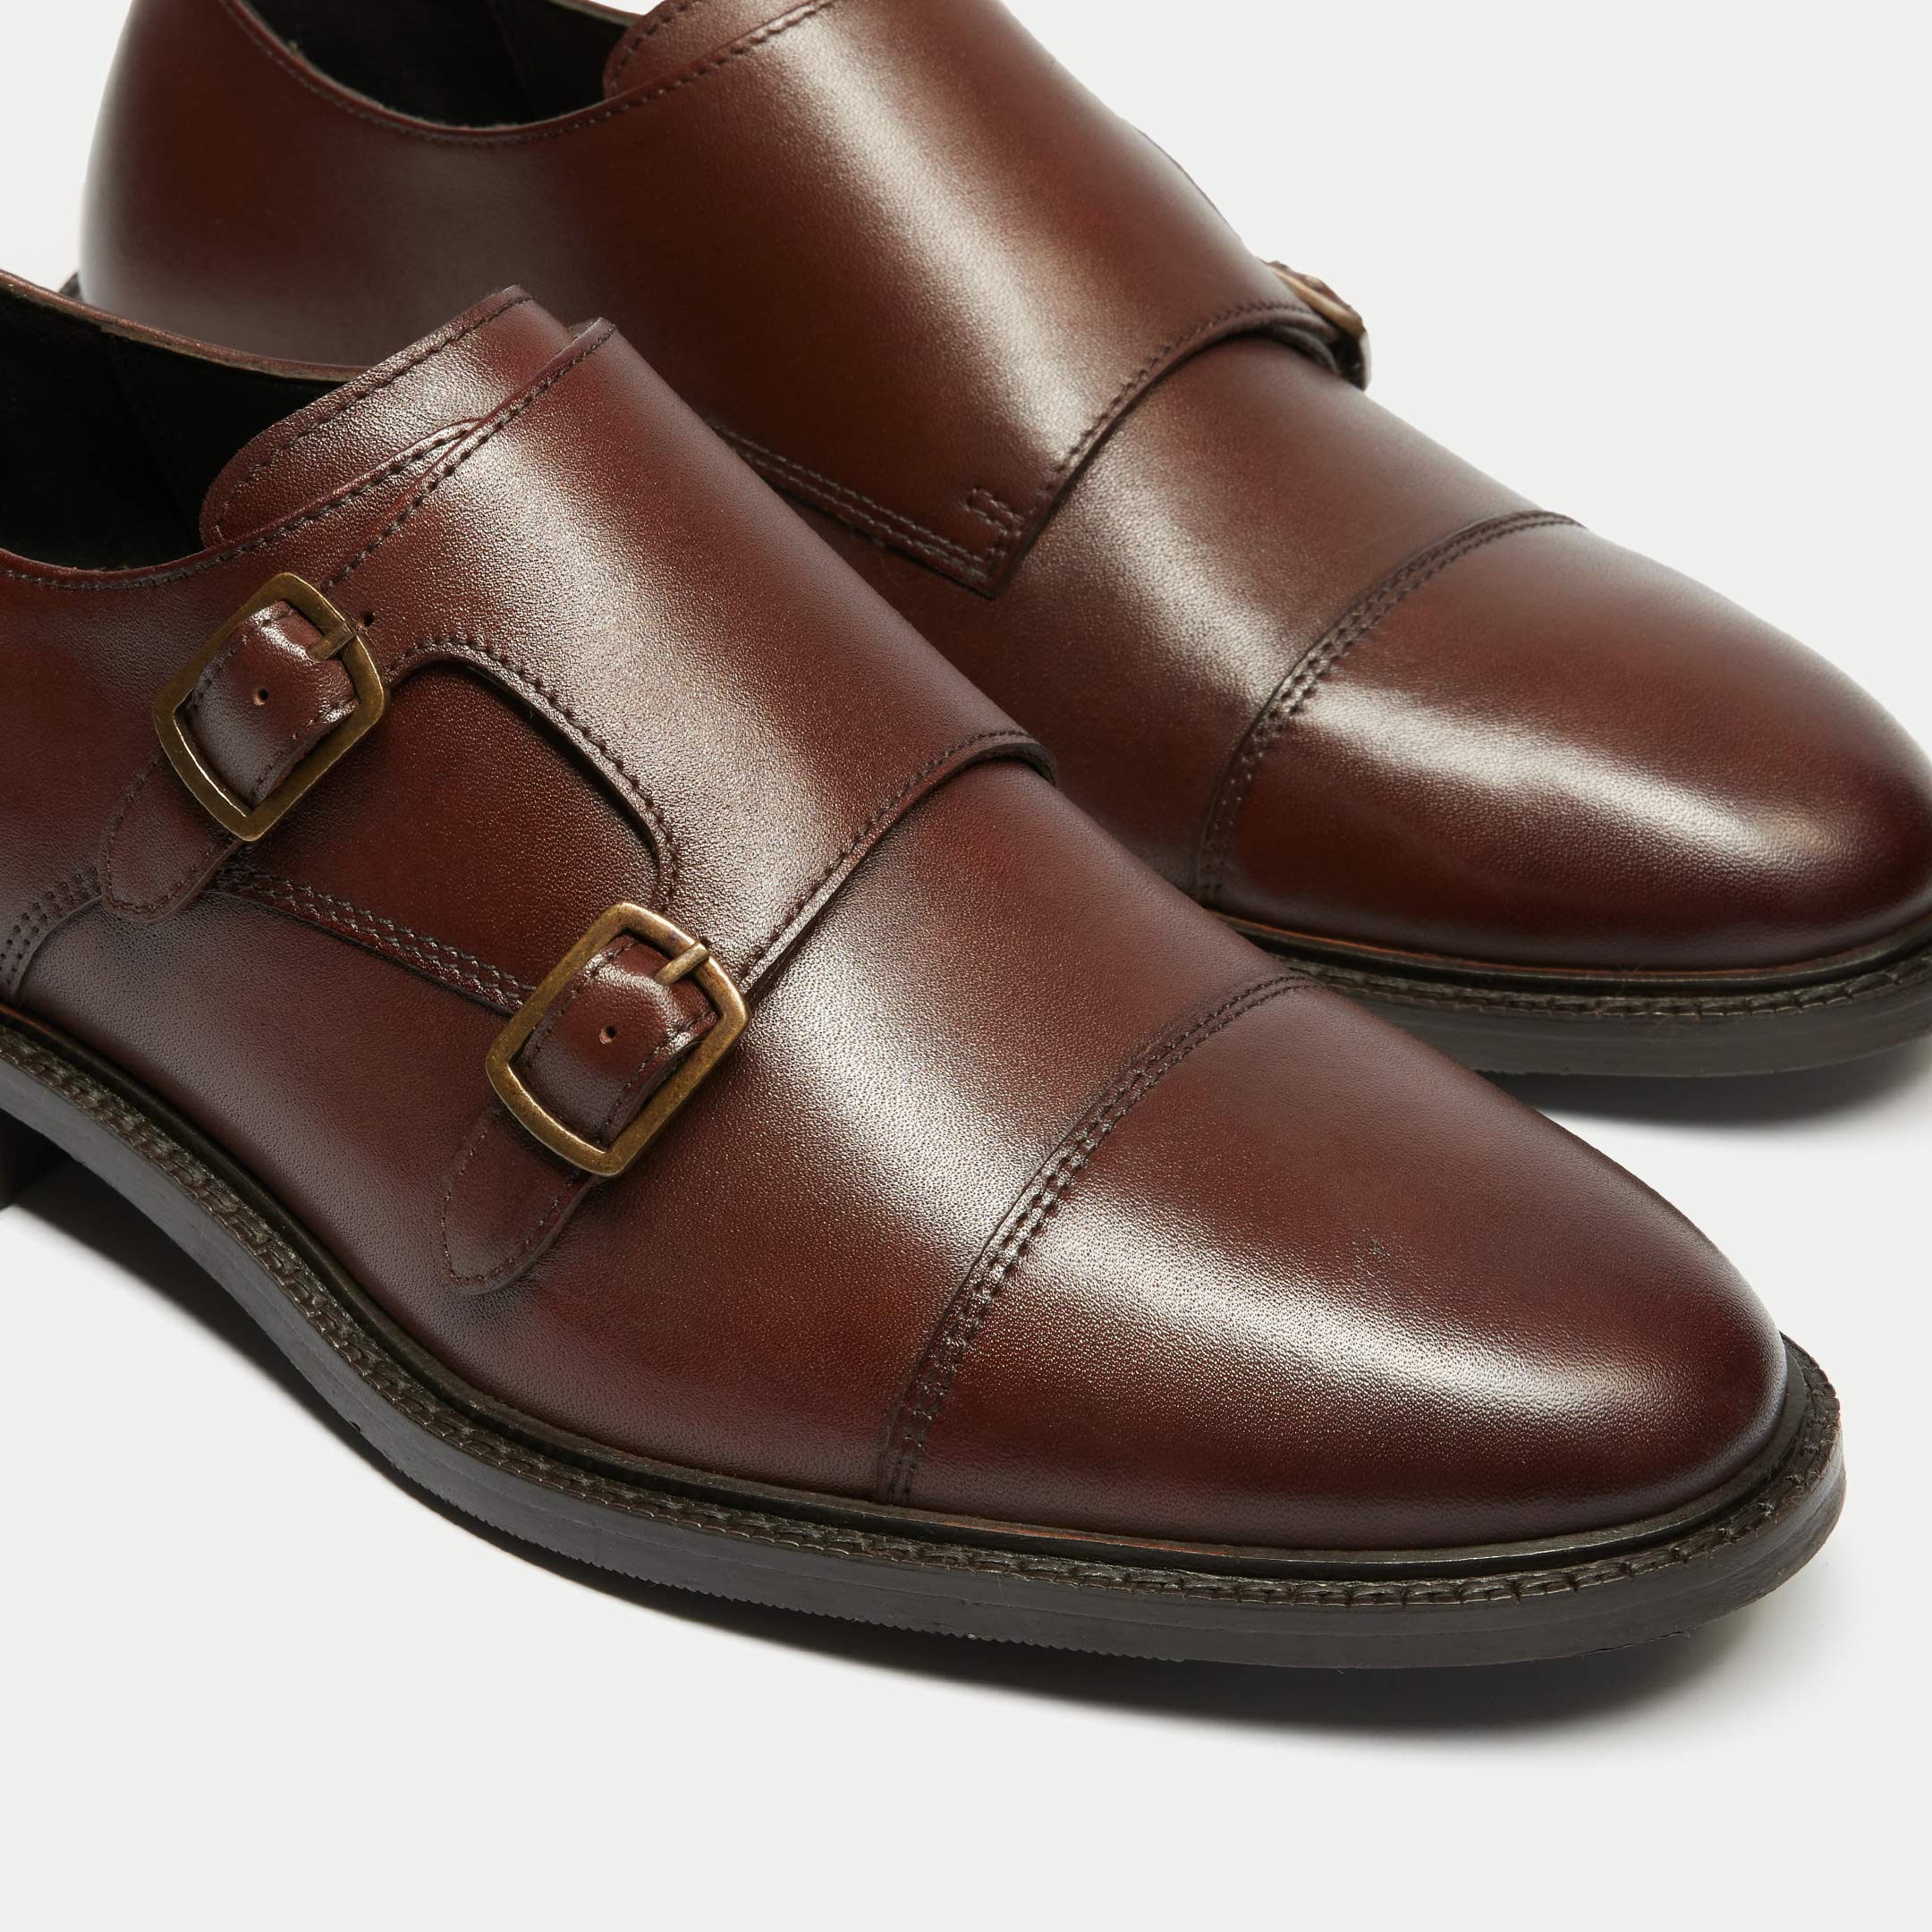 Walk London Mens Oliver Monk Strap Shoe in Brown Leather